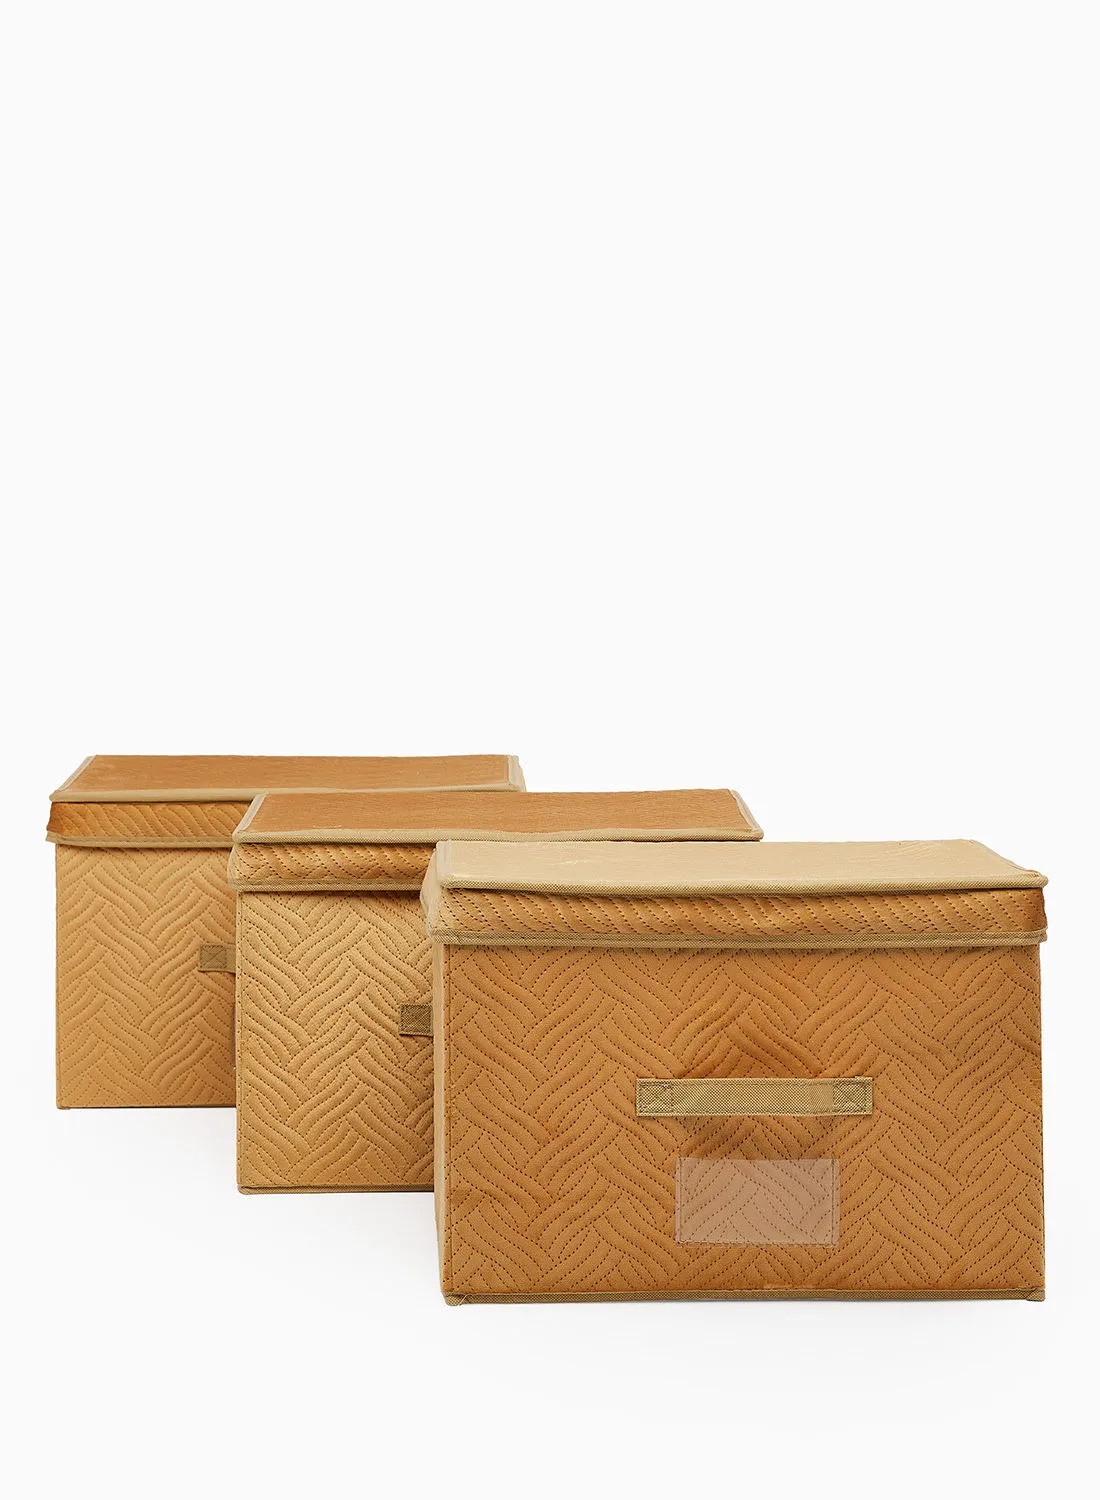 Amal 3 Pack Storage Organiser With Side Handles And Top Zipper Lid, Easy To Collapse From The Top, Handy For Closet And Dresser Organisation Yellowish-Brown 39X27X26cm